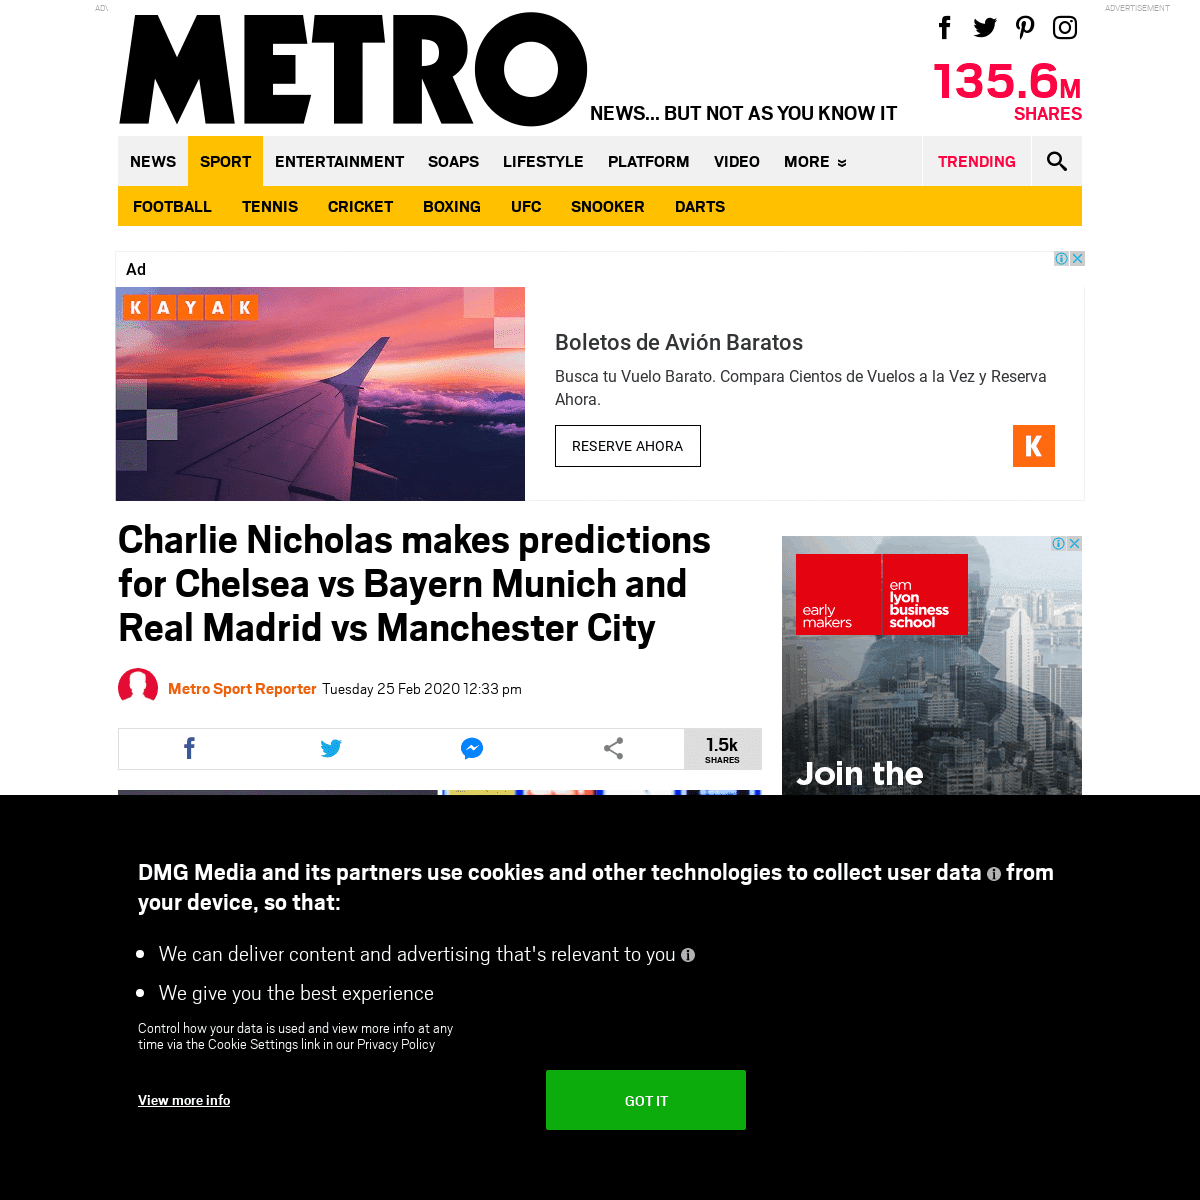 A complete backup of metro.co.uk/2020/02/25/charlie-nicholas-makes-predictions-chelsea-vs-bayern-munich-real-madrid-vs-mancheste